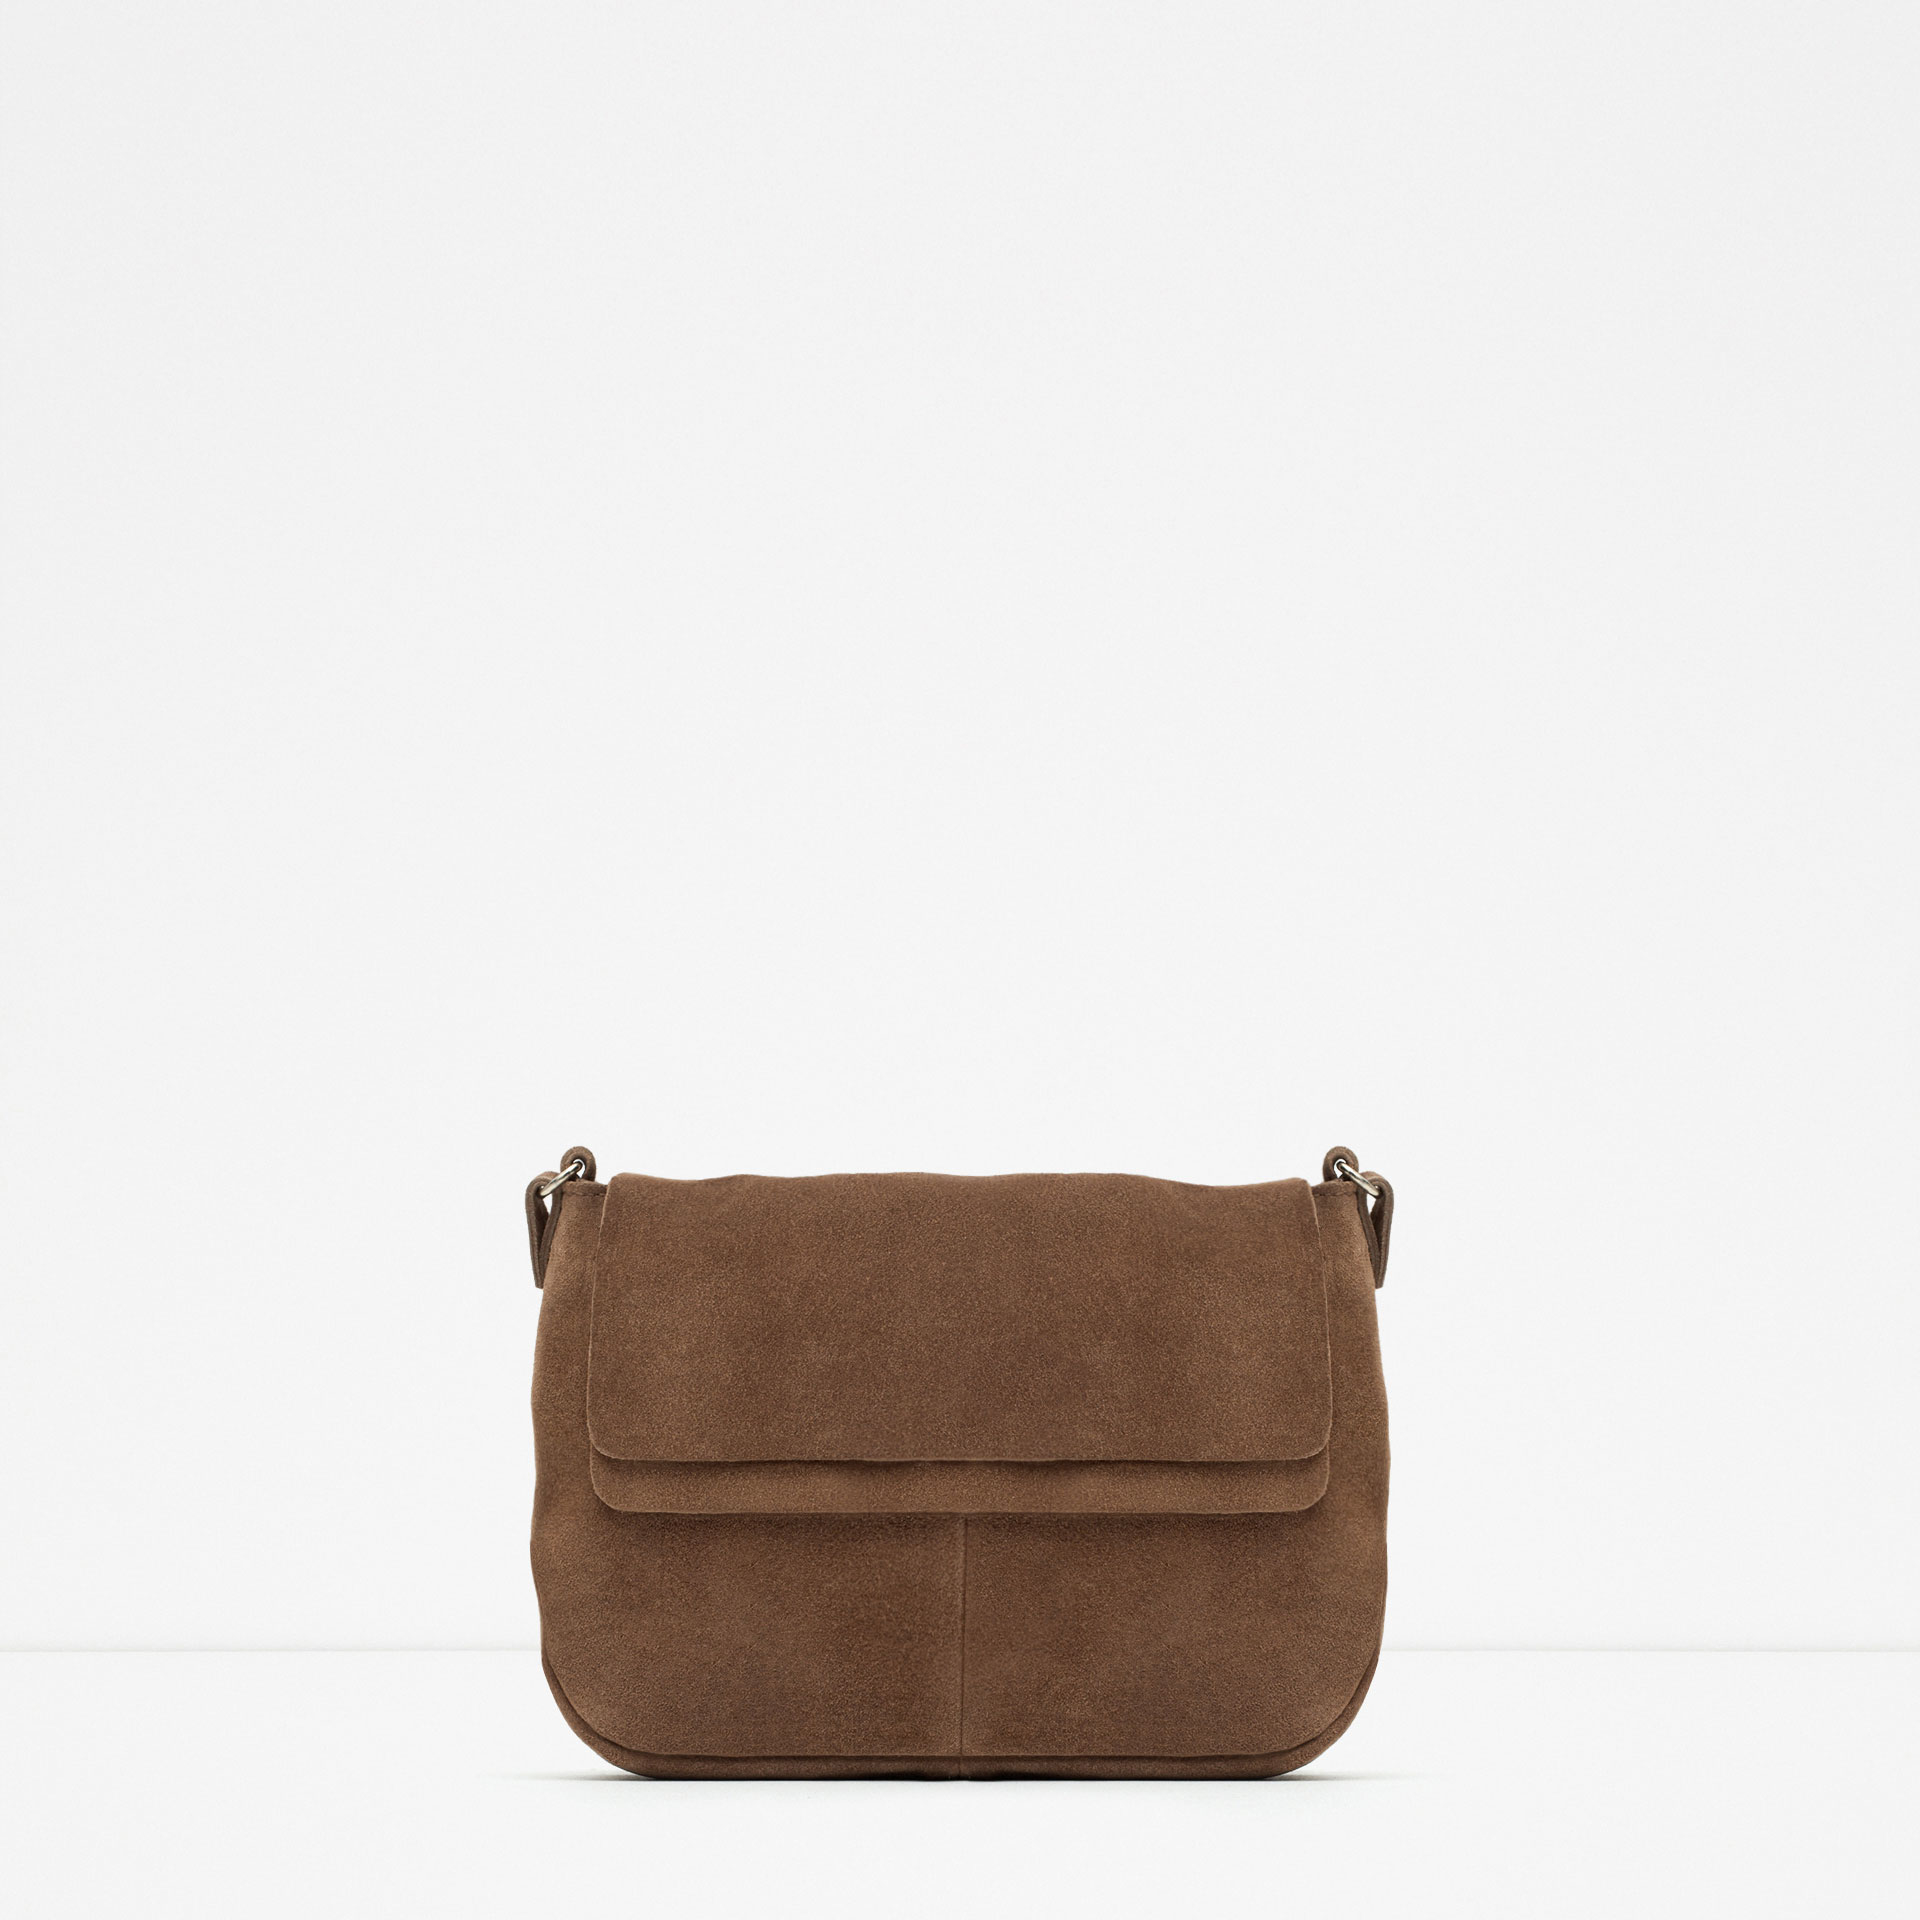 Zara Mini Suede Messenger Bag in Brown (Leather) | Lyst